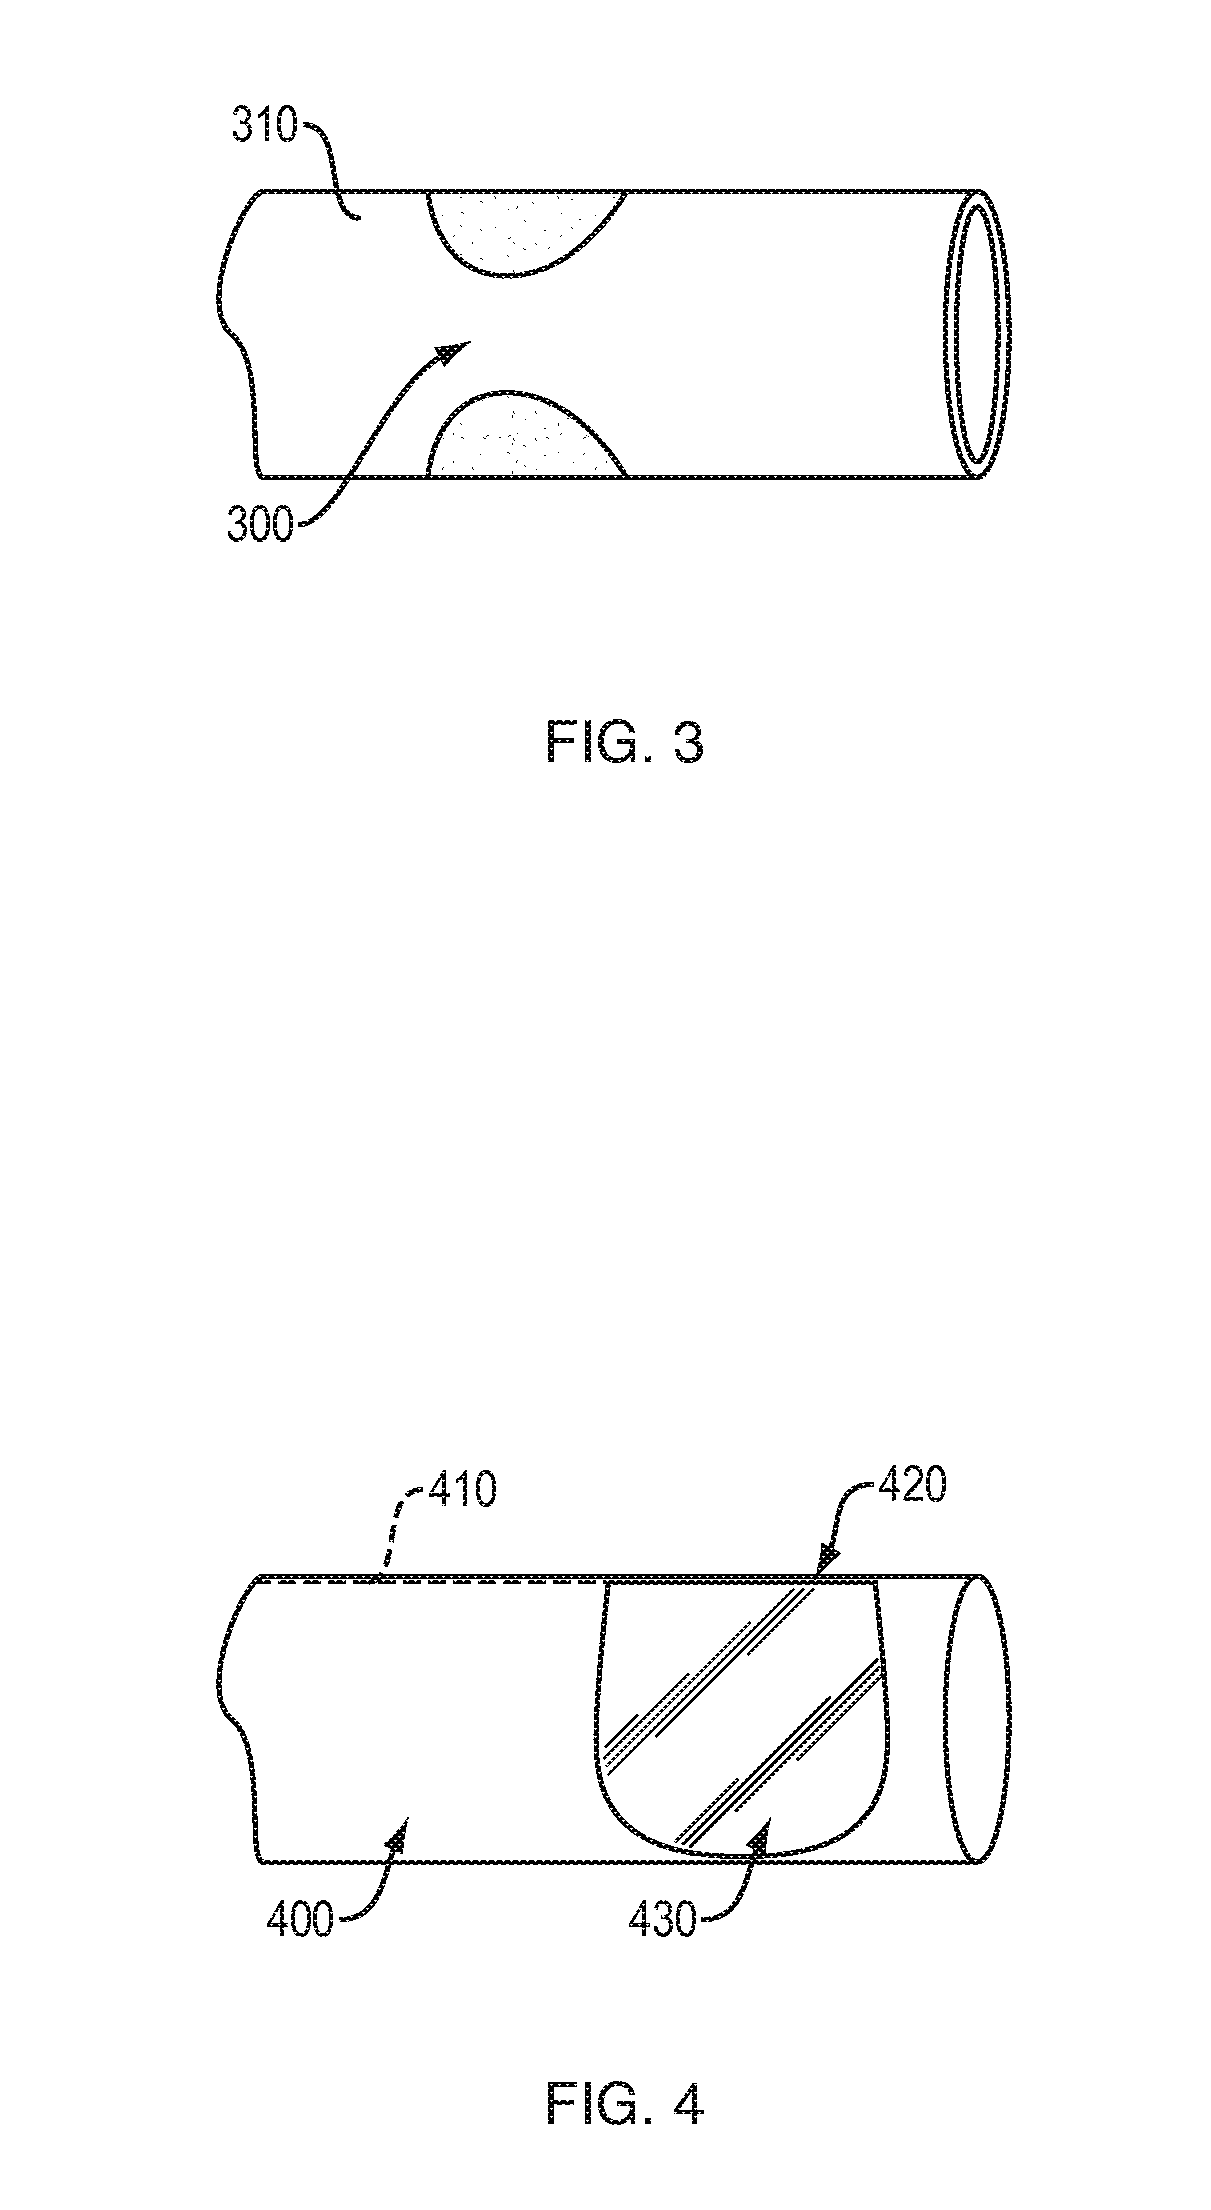 In-Situ Forming Foams for Embolizing or Occluding a Cavity